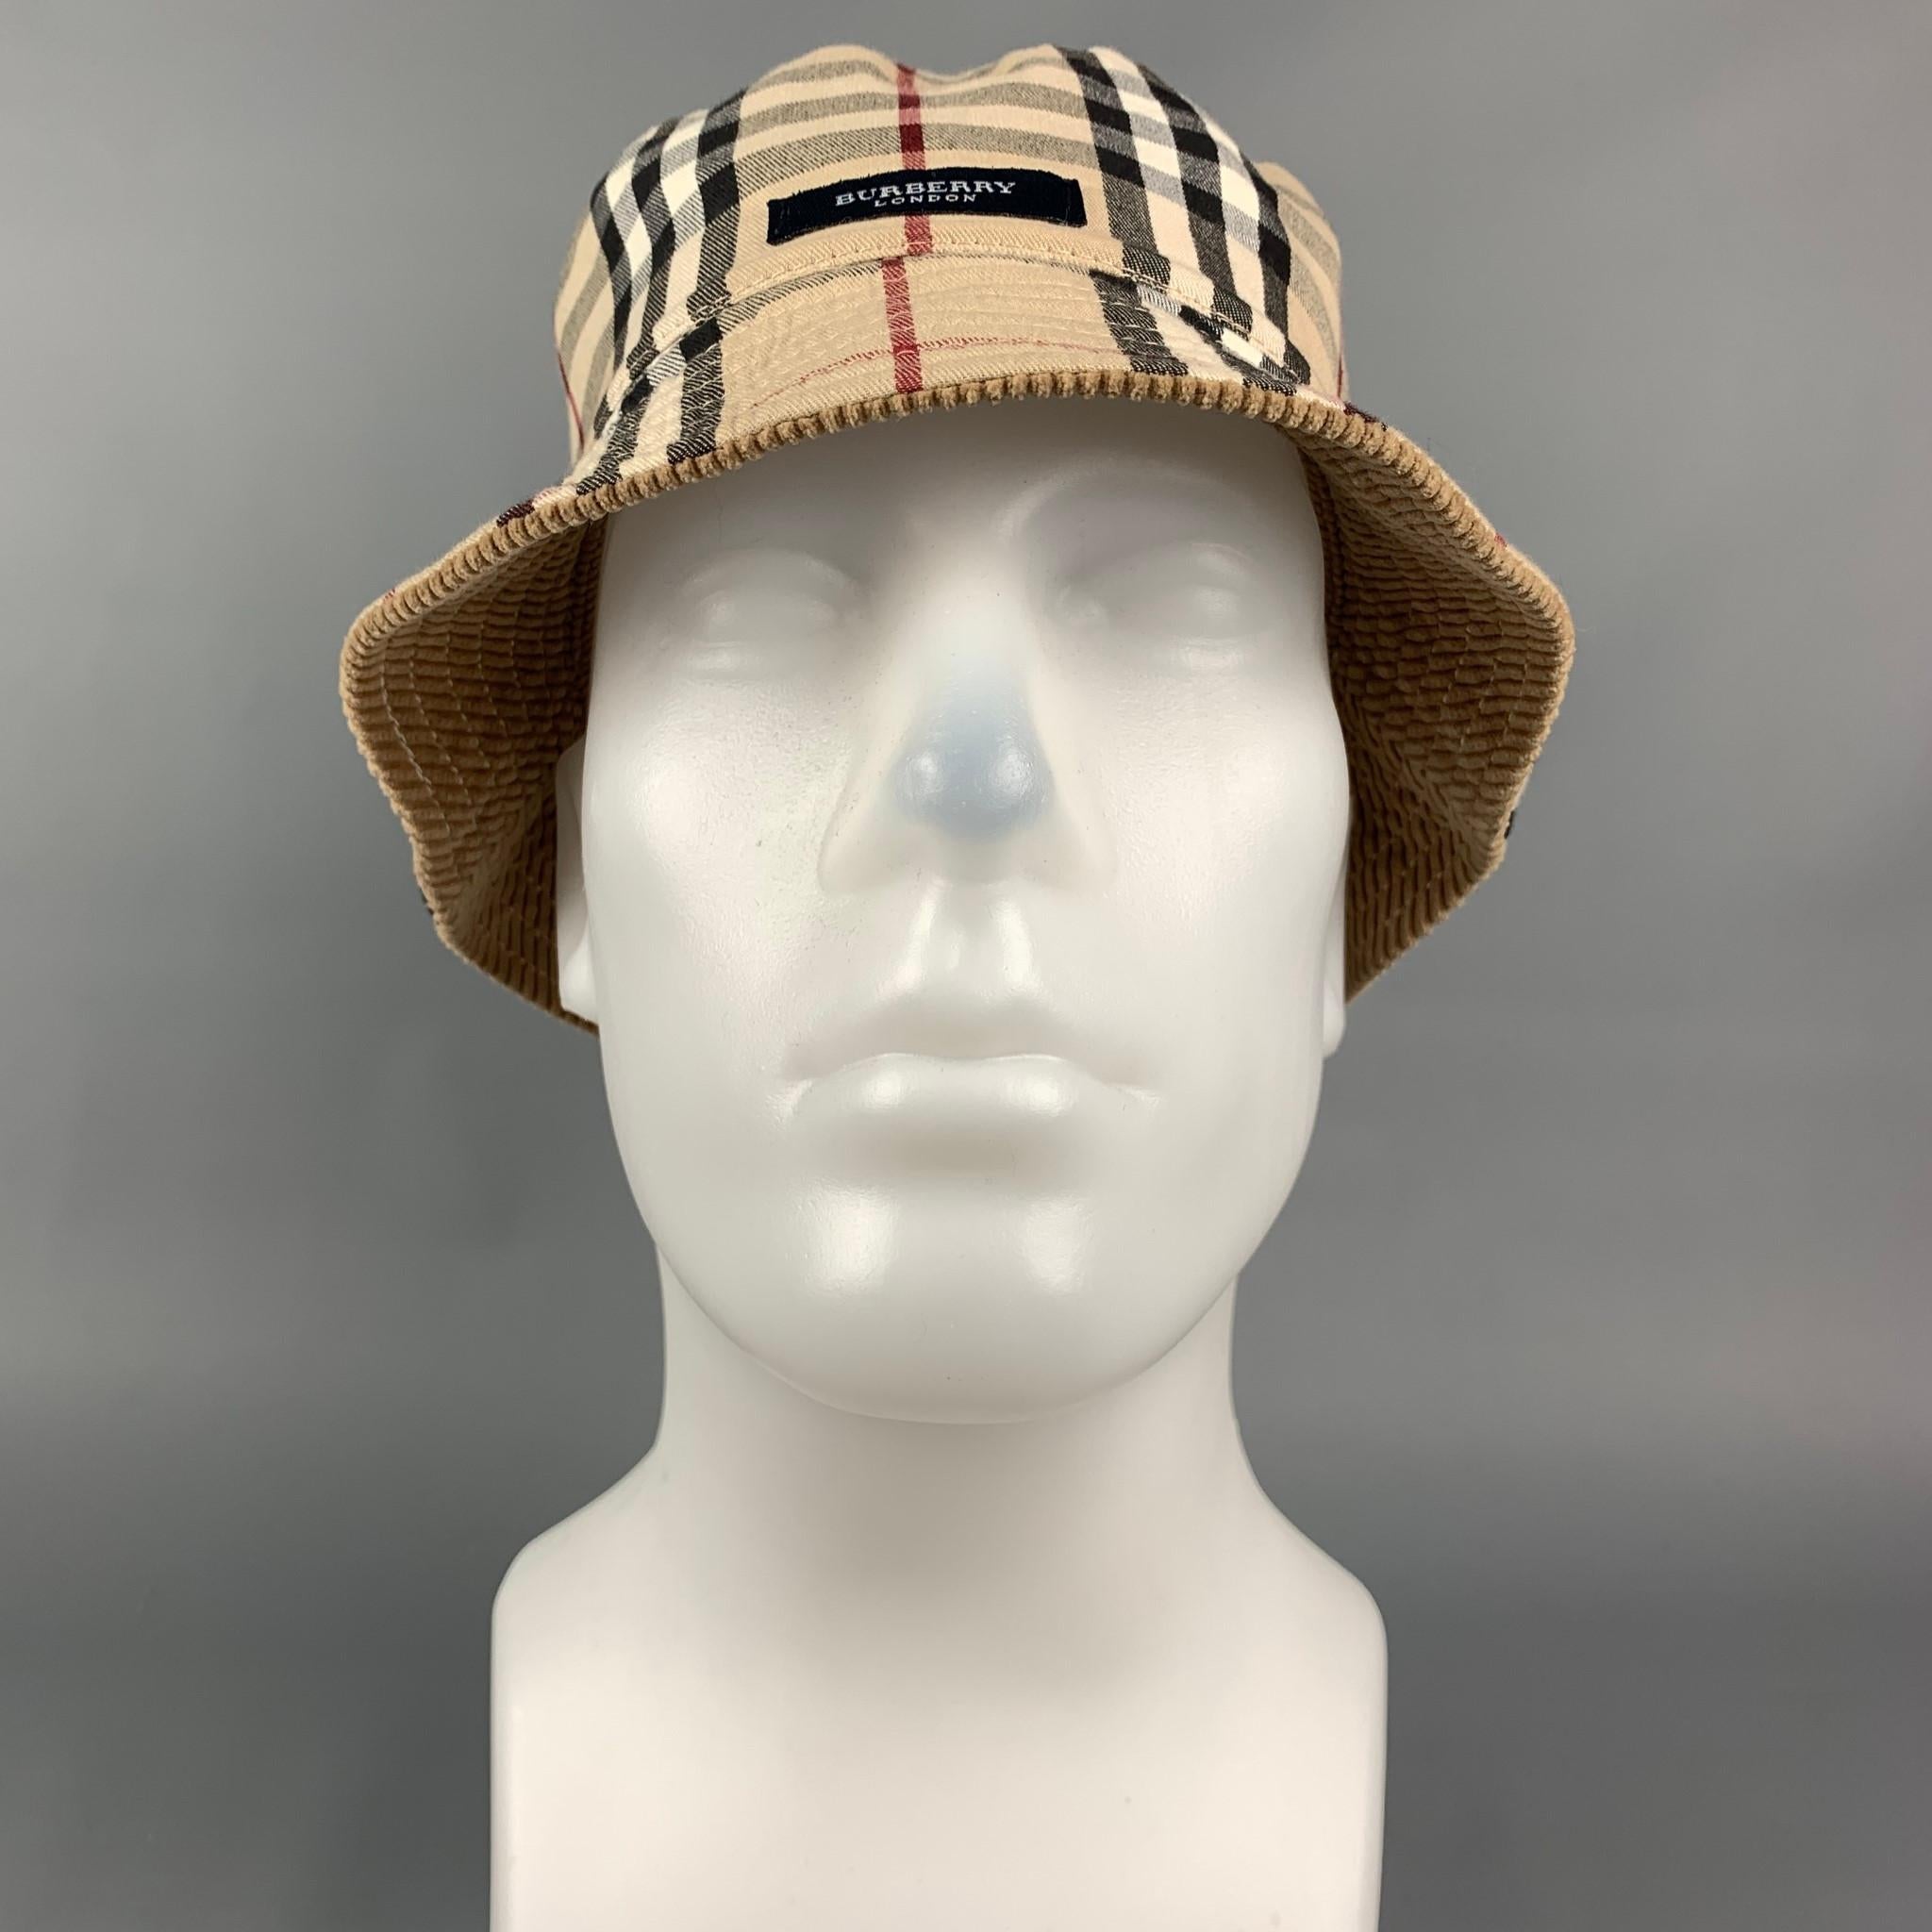 BURBERRY LONDON bucket hat comes in a beige & tan plaid cotton featuring a corduroy reversible style. 

Very Good Pre-Owned Condition.
Marked: Size tag removed.
Original Retail Price: $420.00

Measurements:

Opening: 22 in.
Brim: 2 in.
Height: 4 in. 